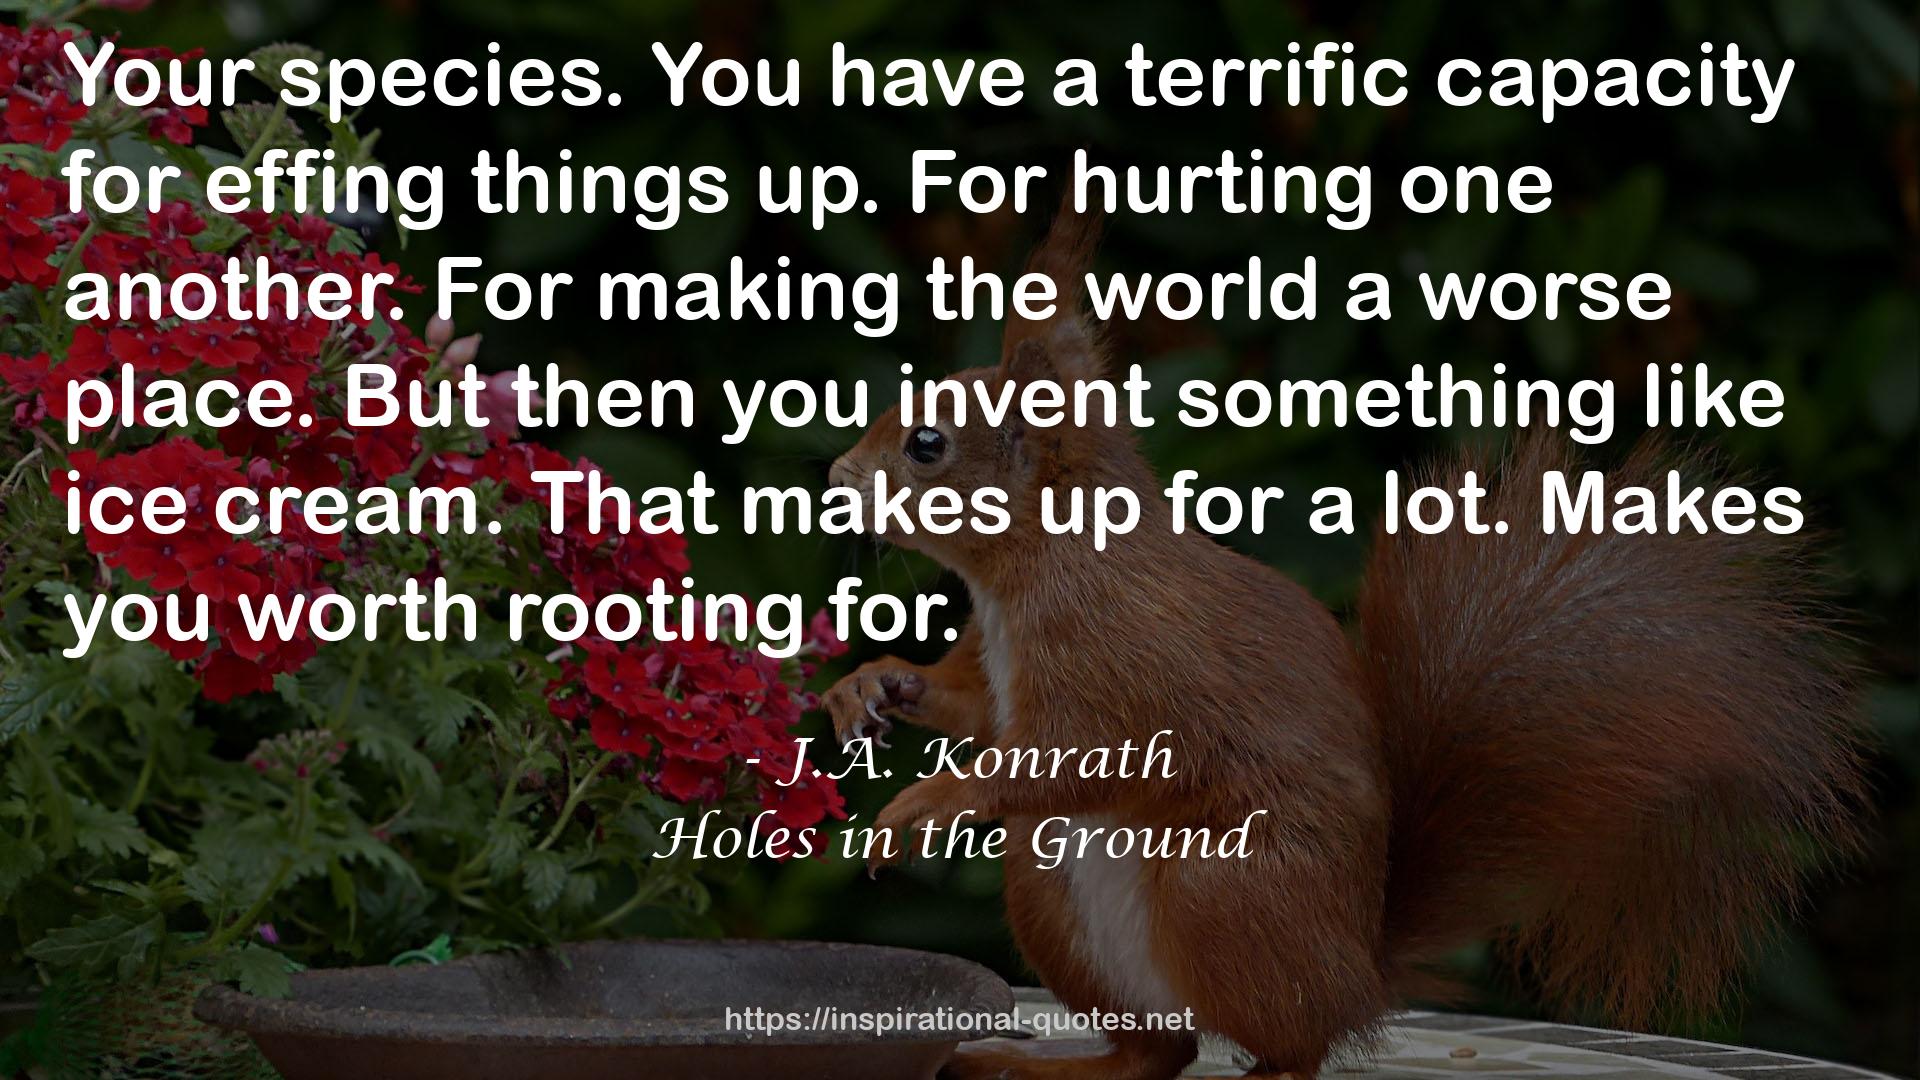 Holes in the Ground QUOTES